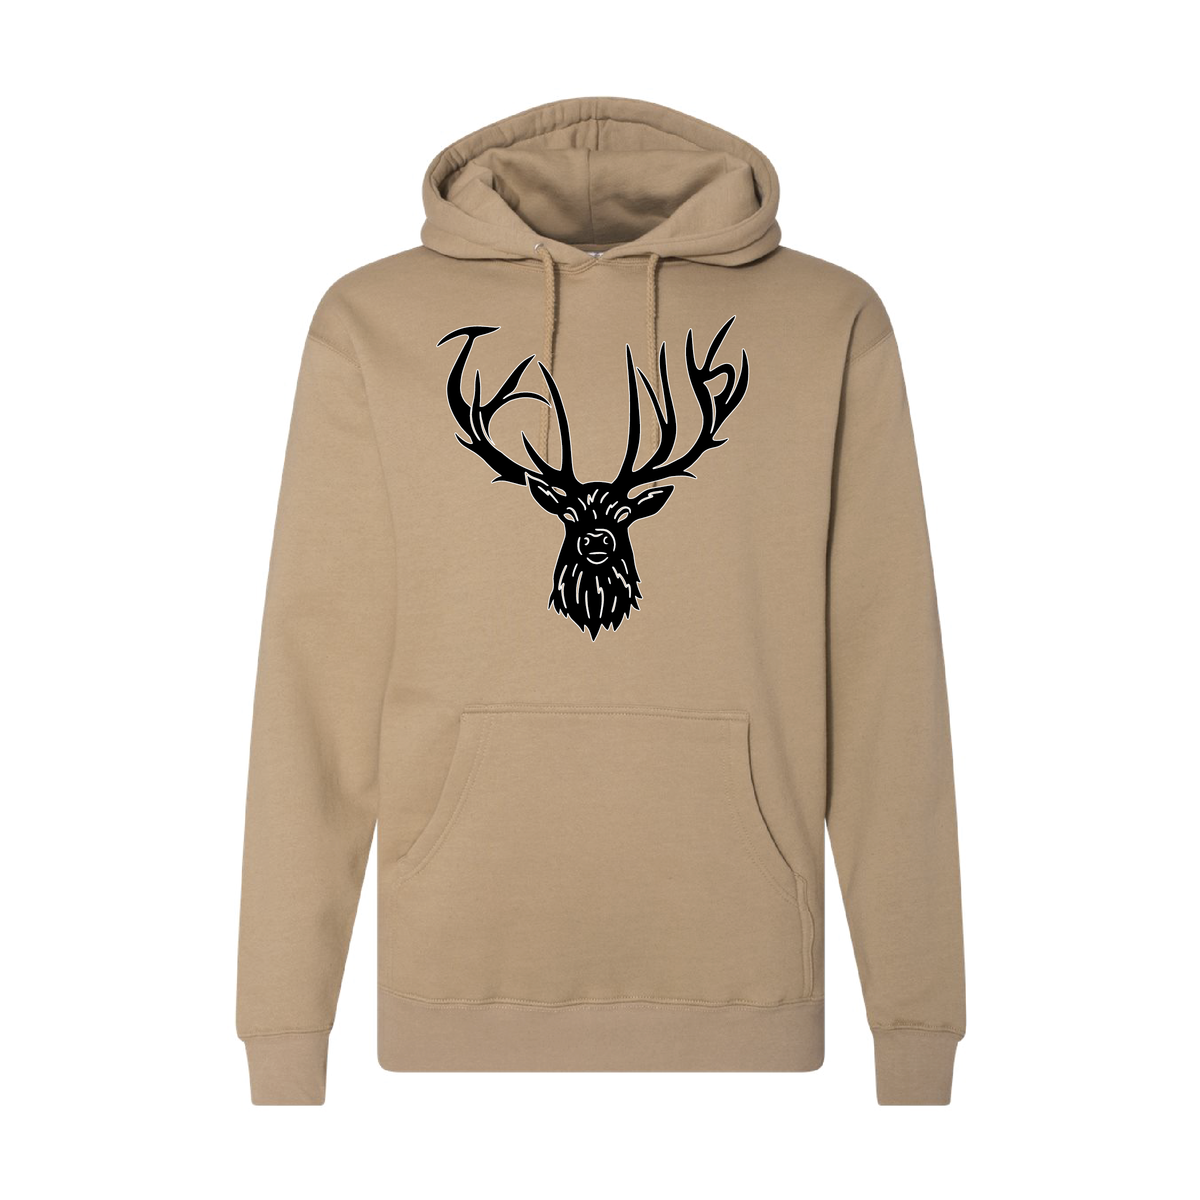 Fishing Jersey - Hunting Hoodie - Free Download Images High Quality PNG,  JPG - 97836